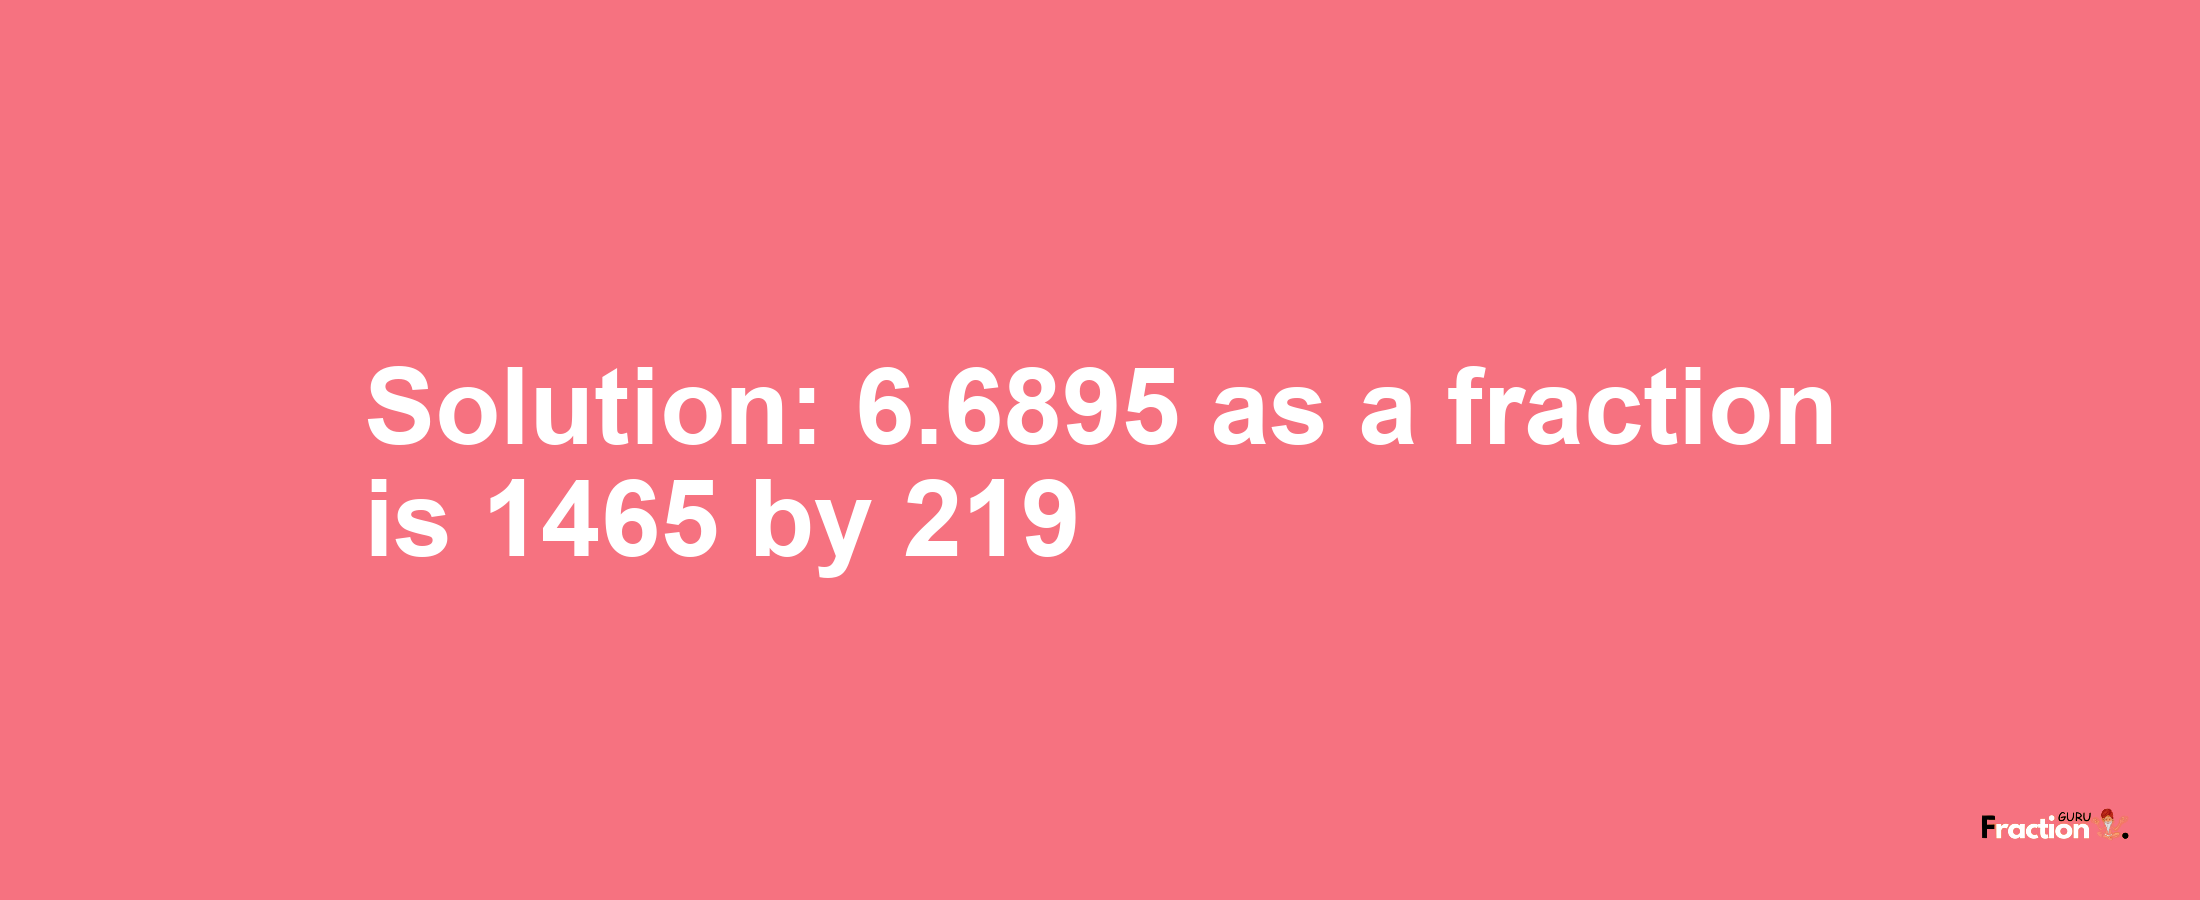 Solution:6.6895 as a fraction is 1465/219